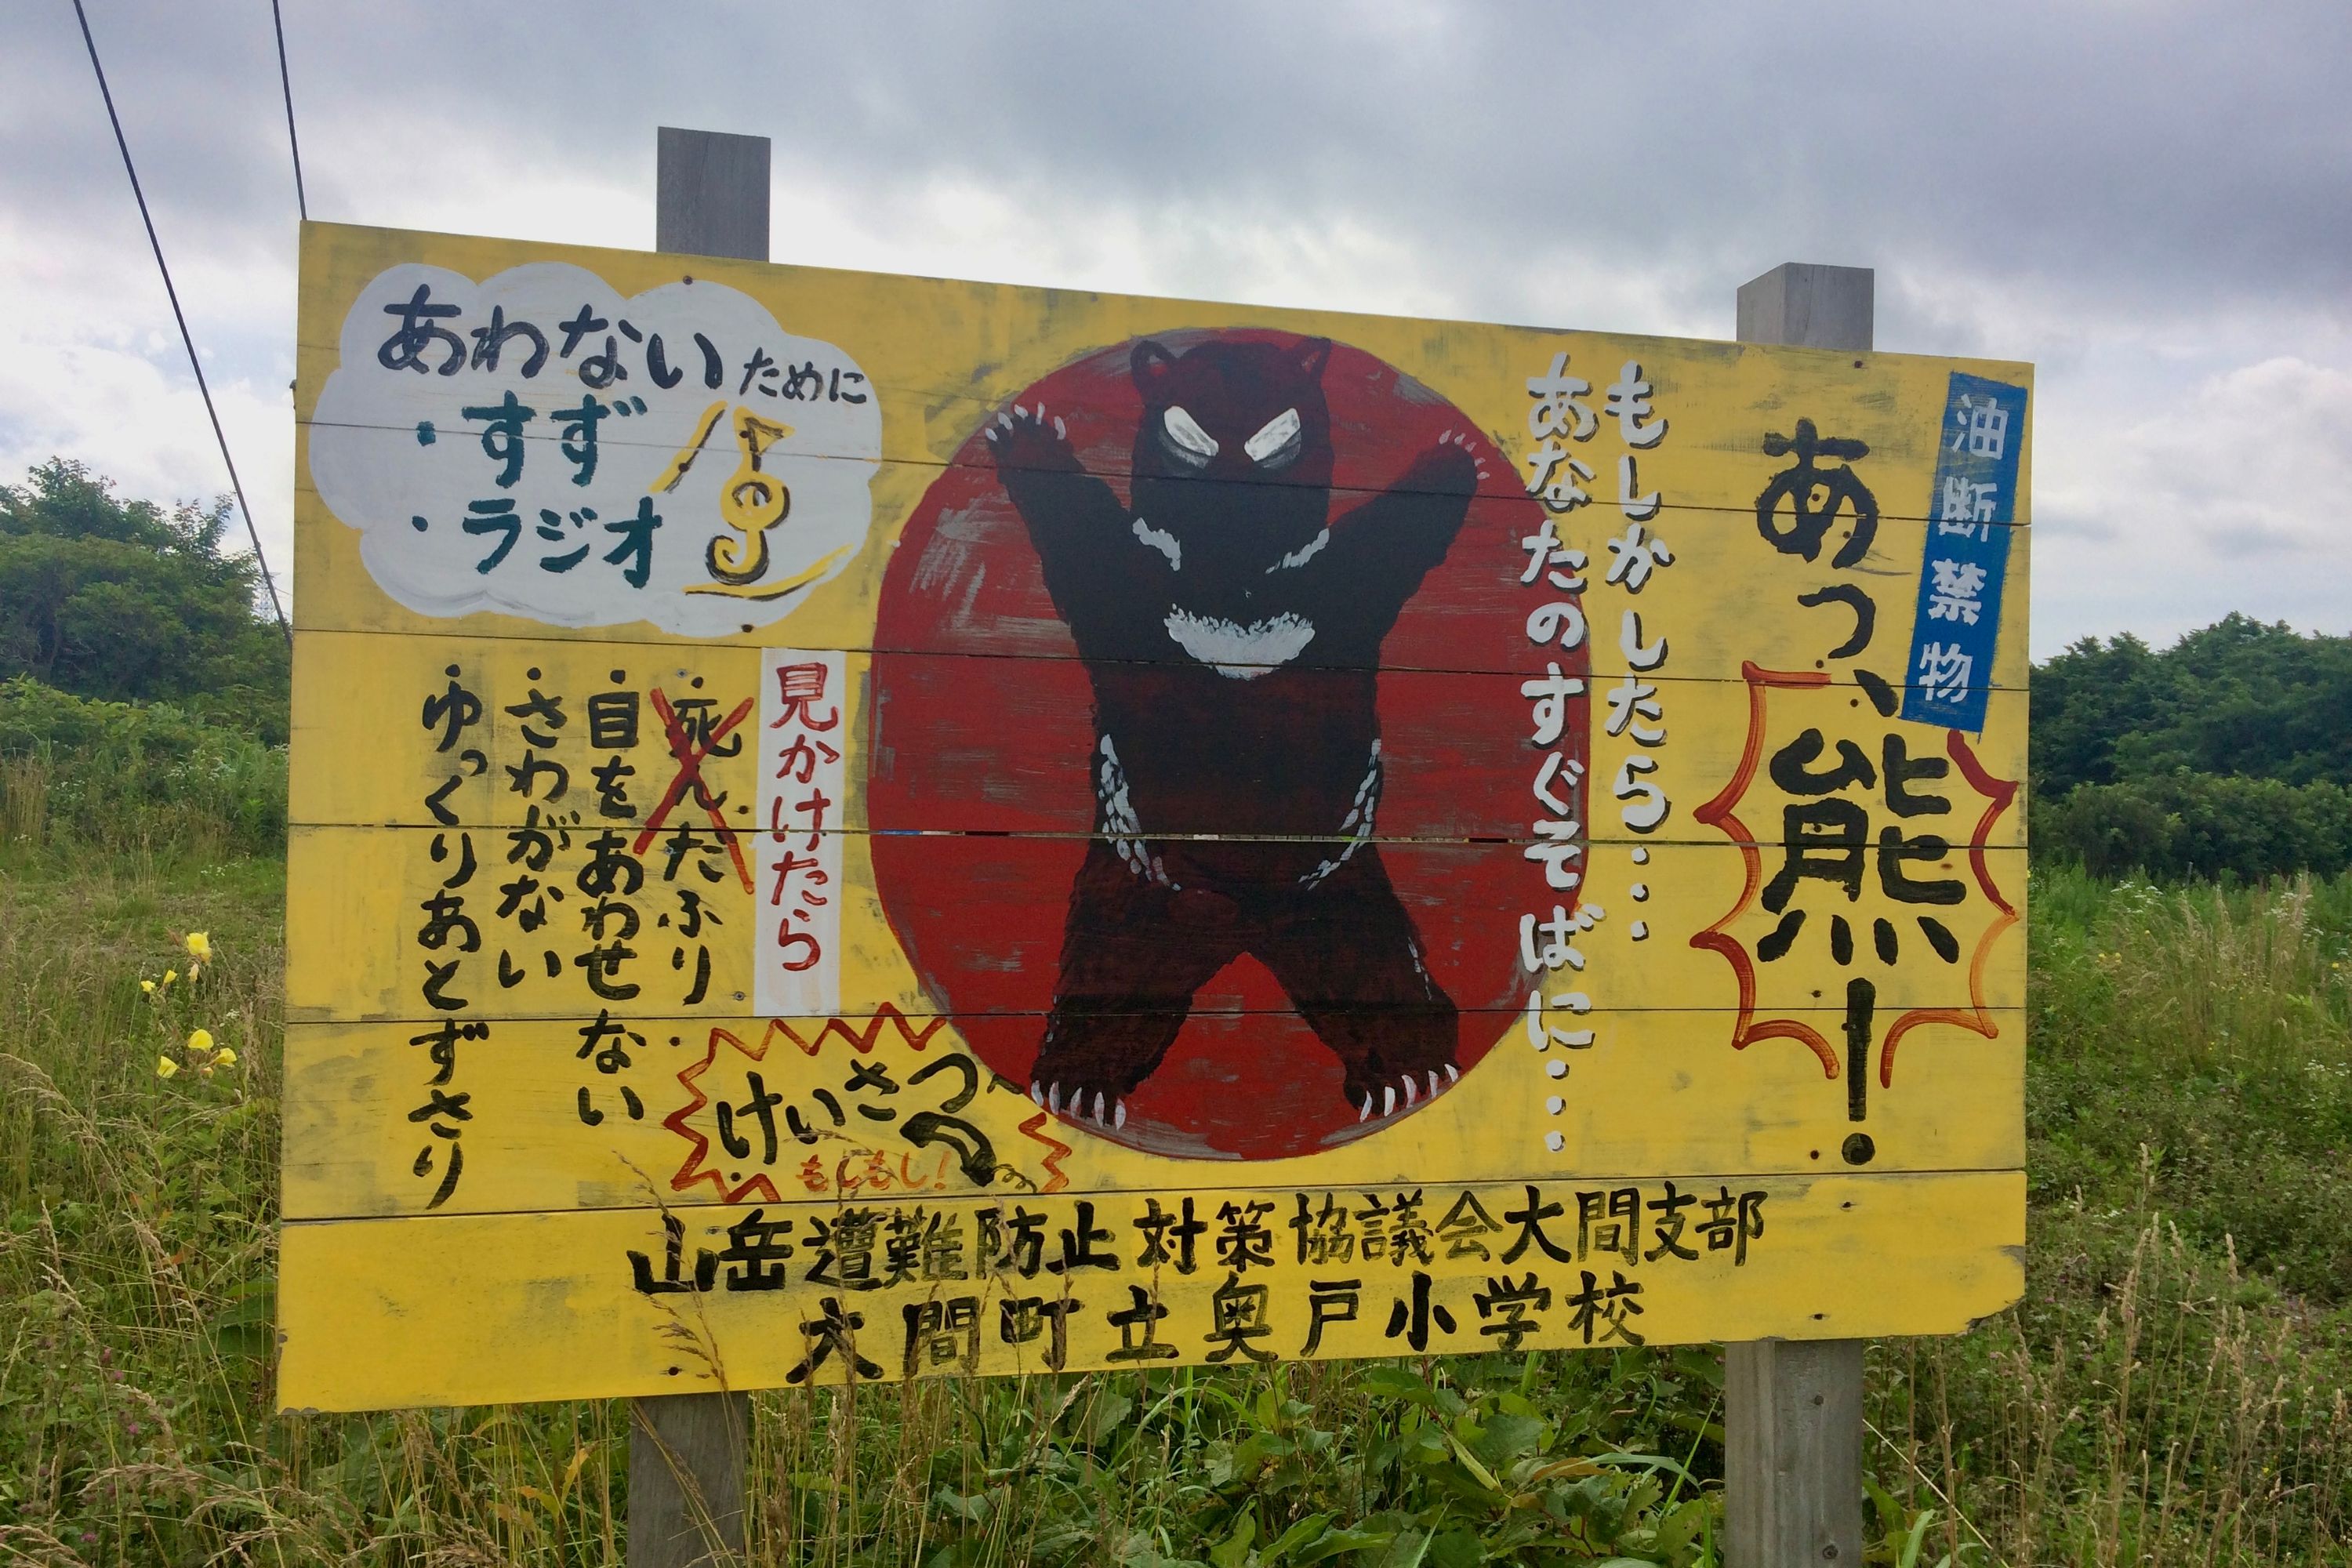 A black bear in a menacing pose on a red-on-yellow billboard with a lot of Japanese writing.